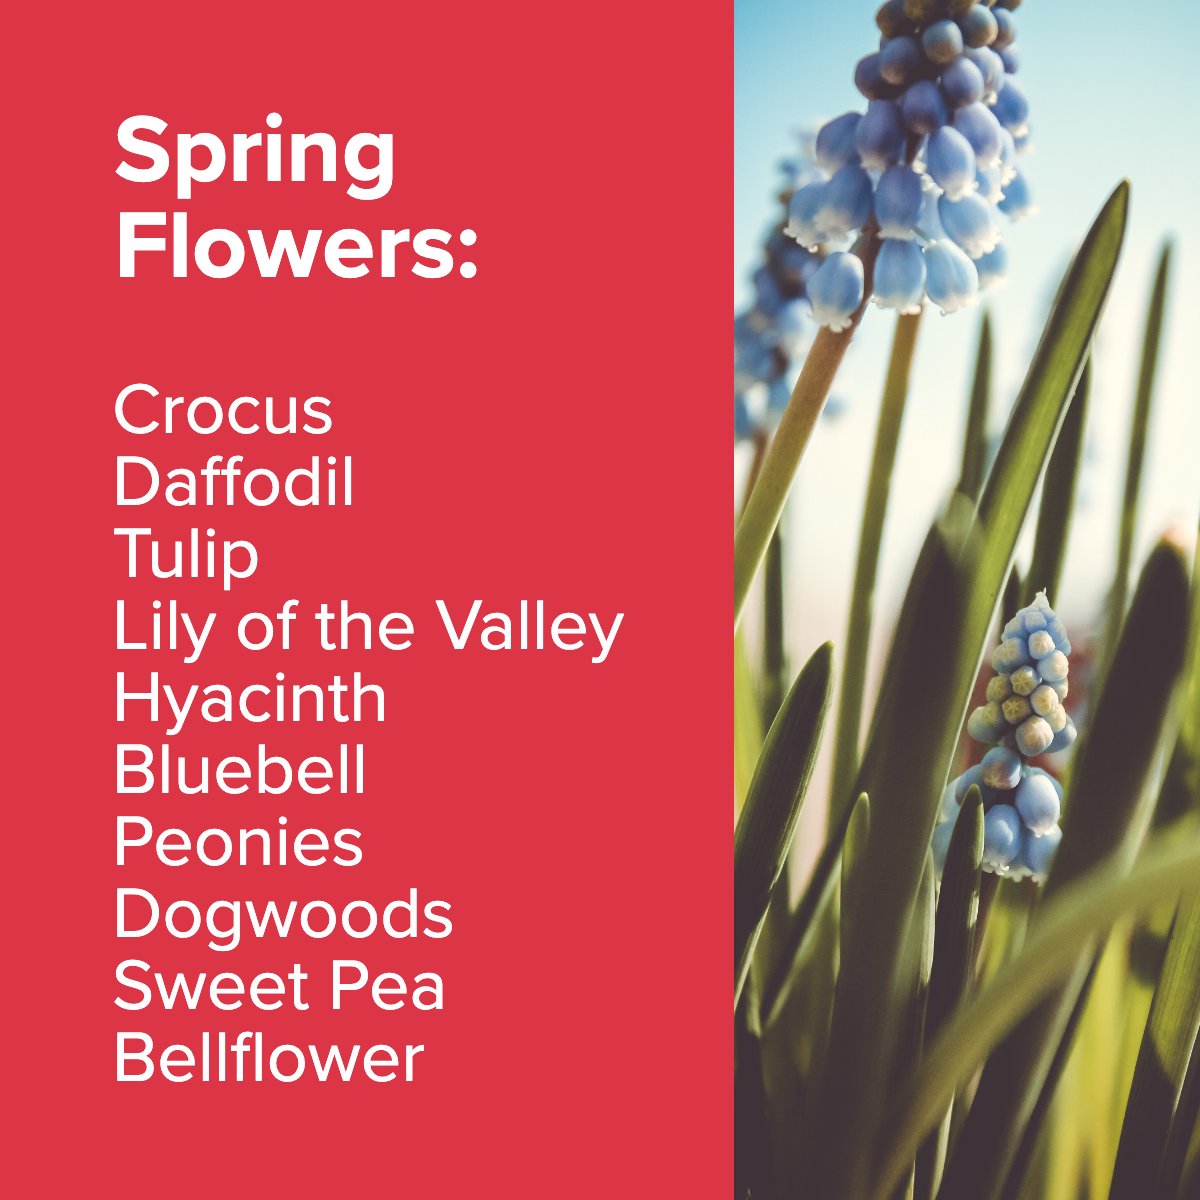 When spring arrives, why not welcome it with a garden full of blossoms to chase the winter blues away? 🌼🌺

#springflowers🌸   #flowersspringtime   #lovespringflowers   #springflowersblooming
#realestate #househuntchicago #davideastham #chicago #parkridge